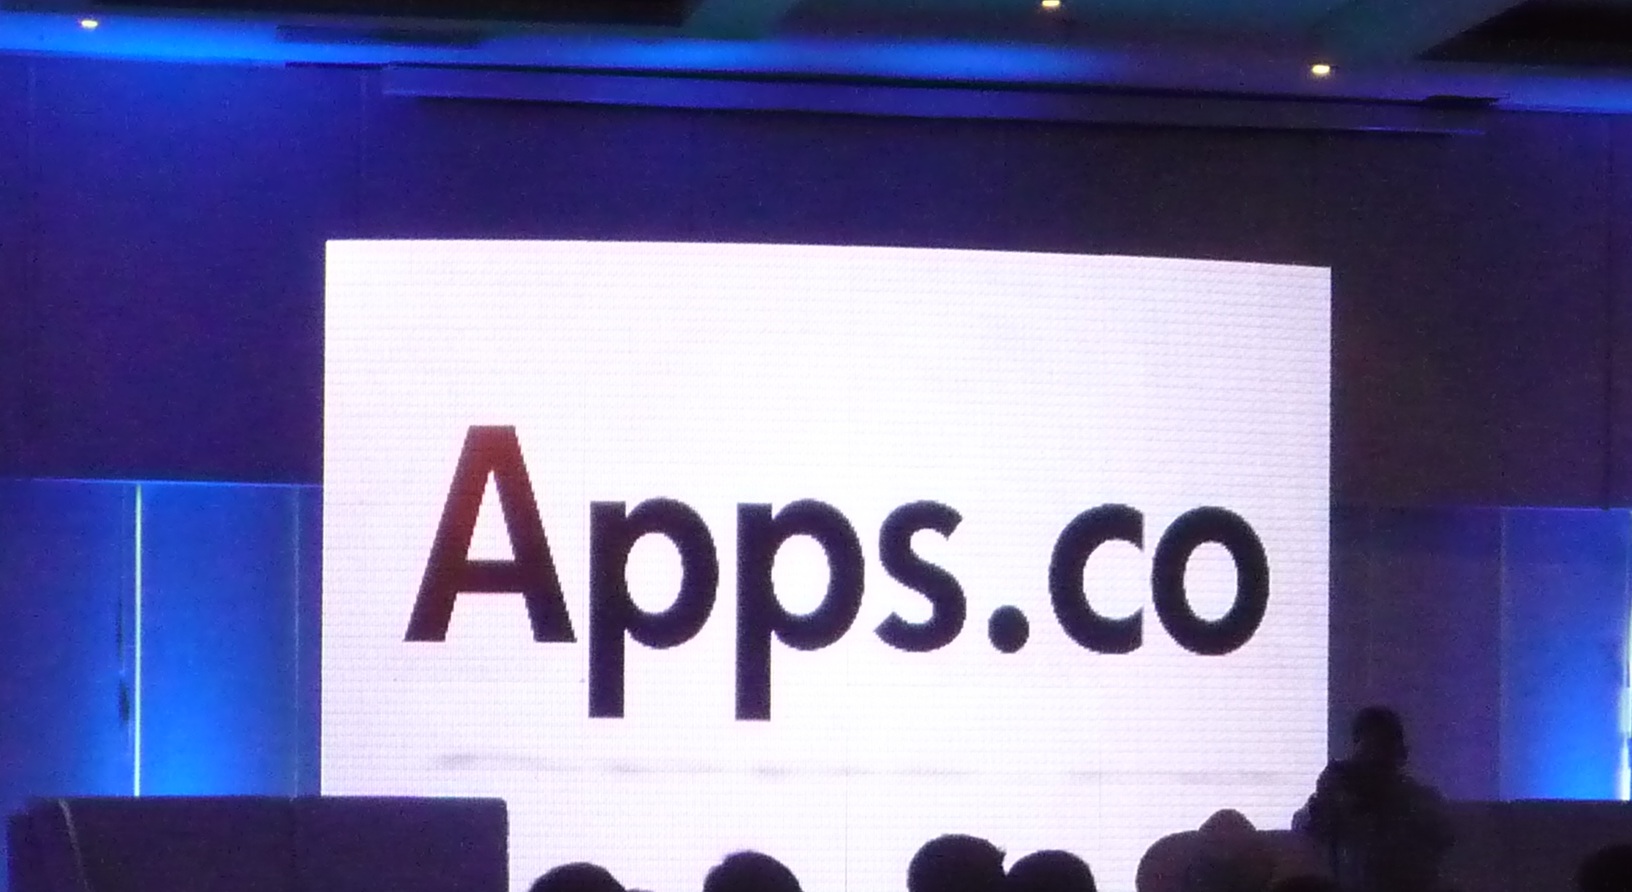 apps.co